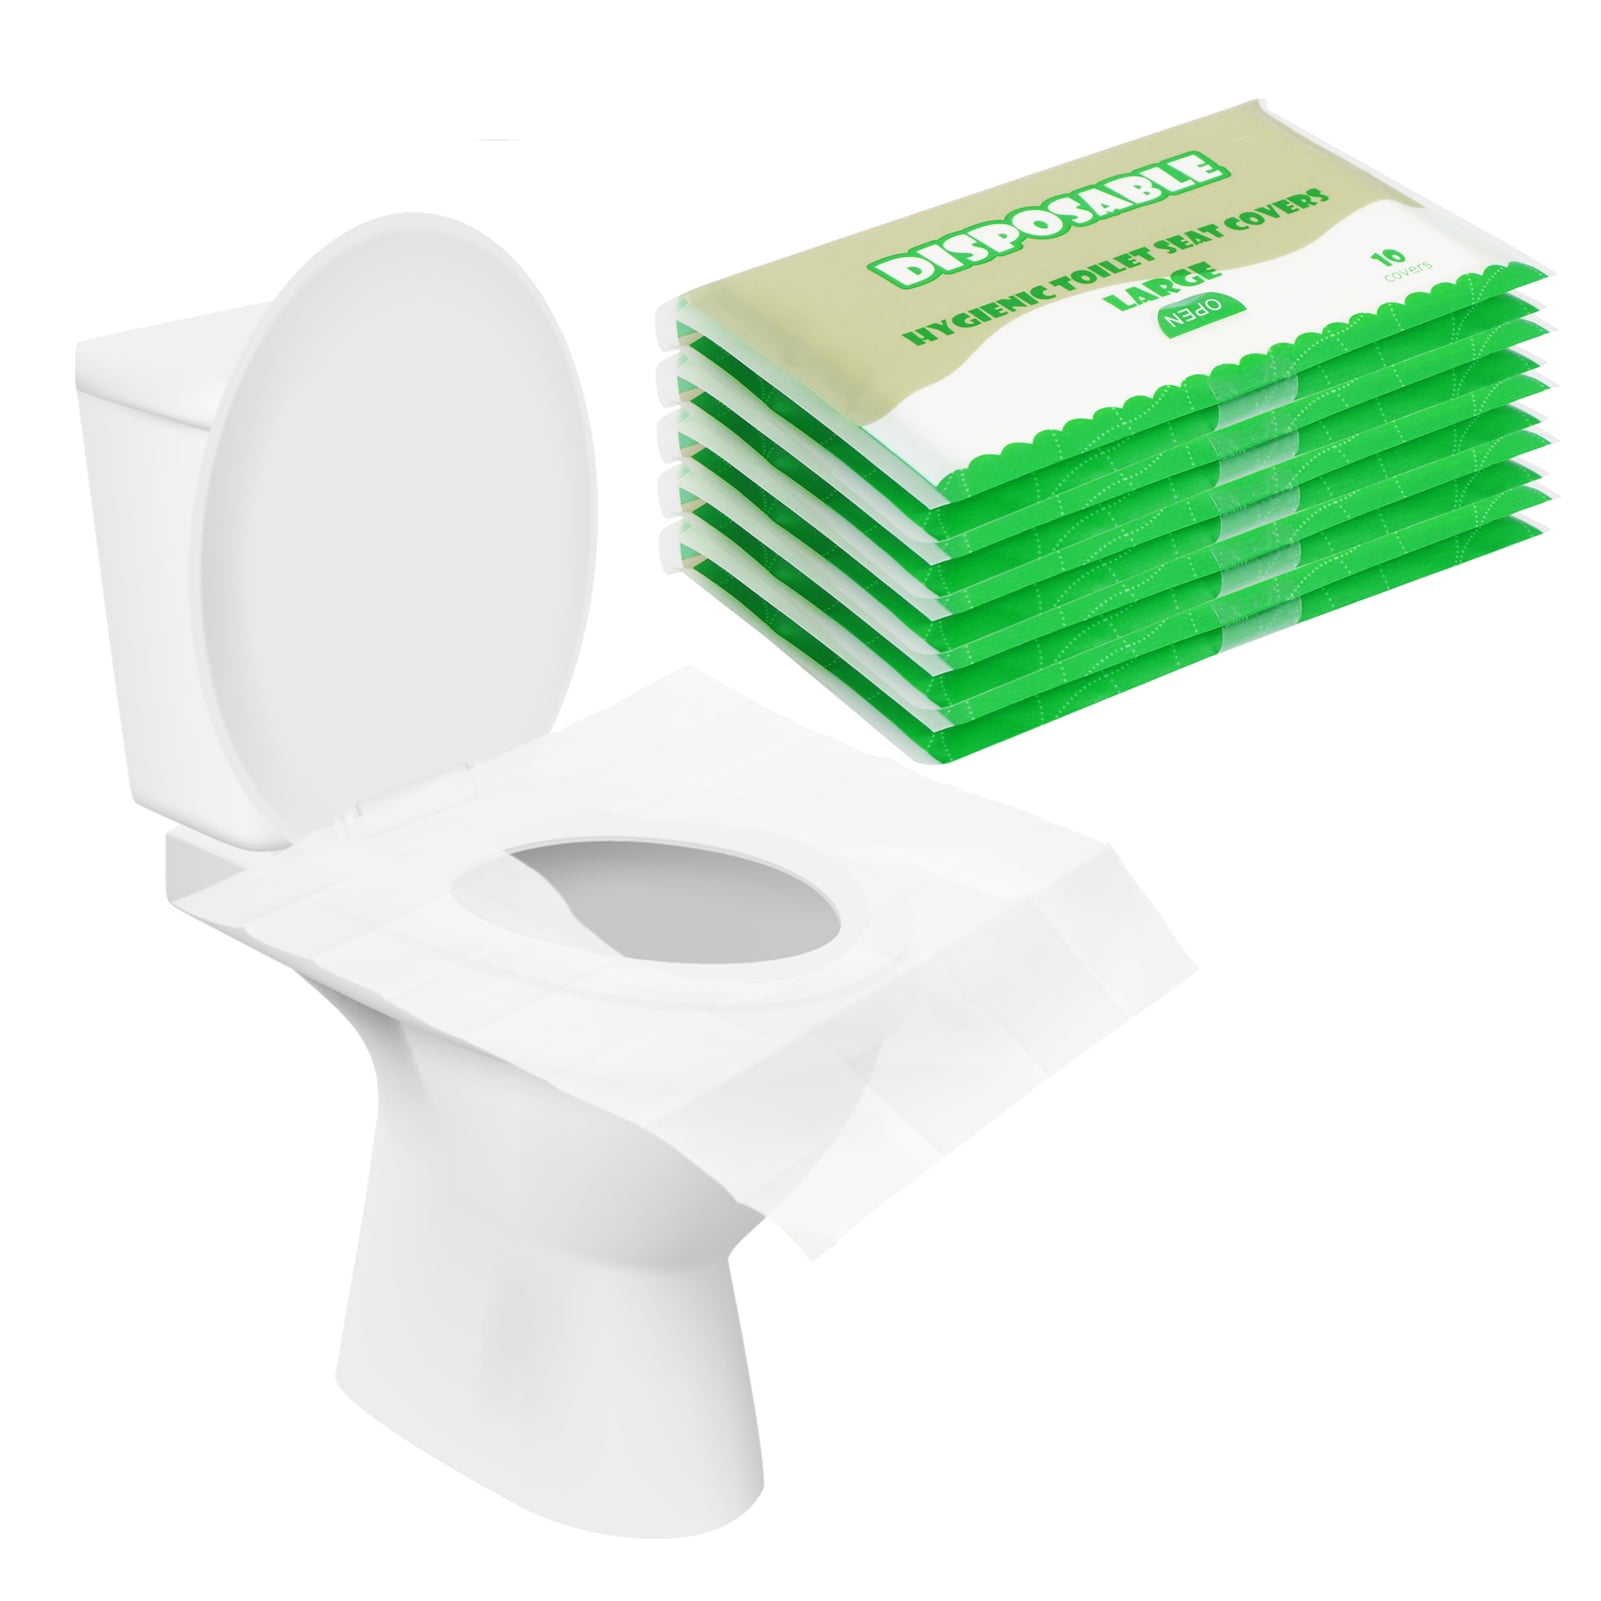 Toilet Seat Covers 100 Pack Flushable Disposable Paper Toilet Seats Cover for Adults and Kids Potty Training 100% Biodegradable for Travel Accessories Public Restrooms Airplane Camping 